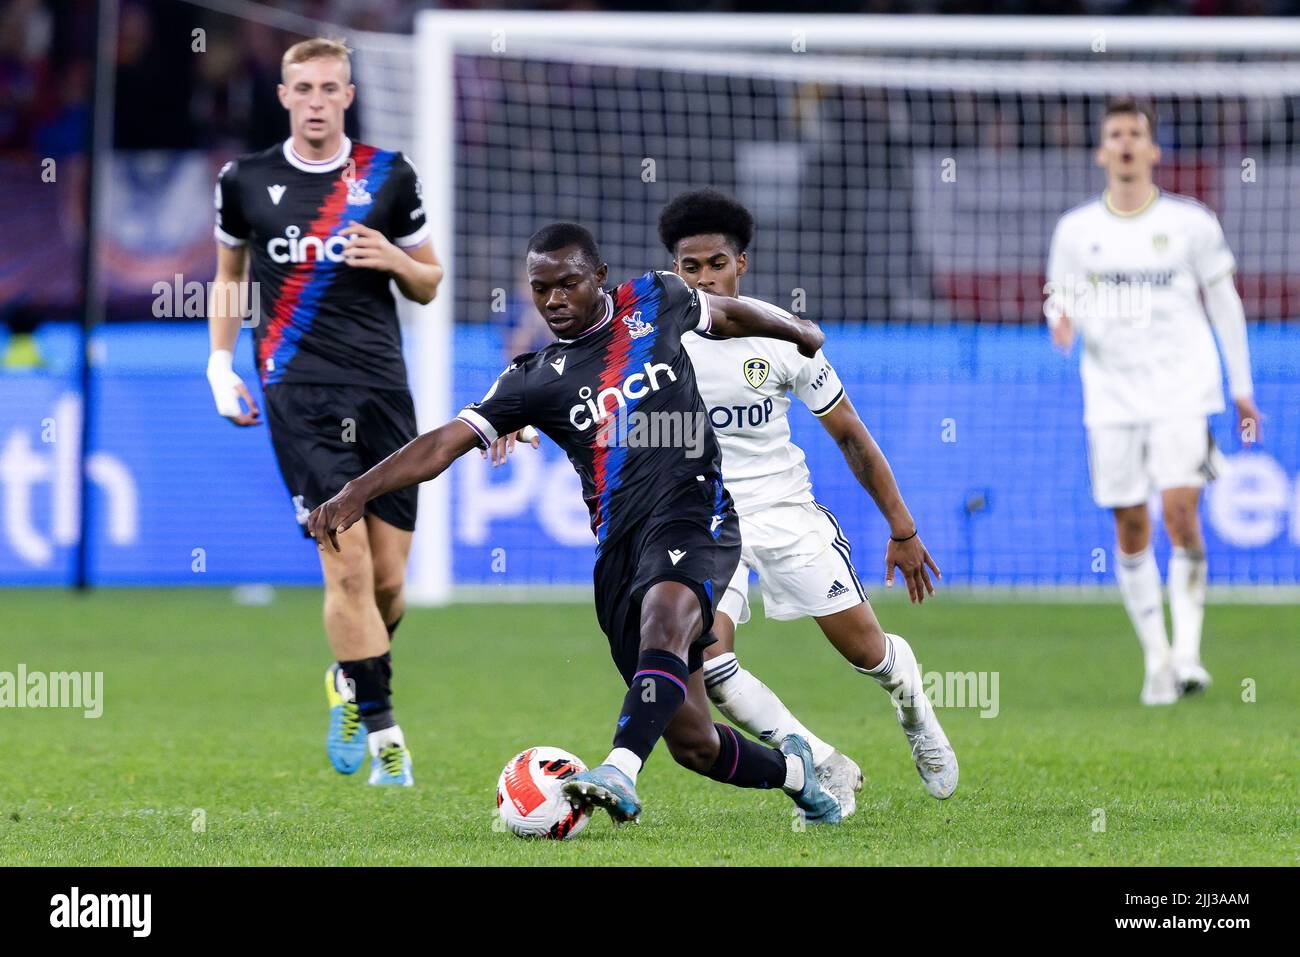 Perth, Australia, 22 July, 2022. Tyrick Mitchell of Crystal Palace controls the ball during the ICON Festival of International Football match between Crystal Palace and Leeds United at Optus Stadium on July 22, 2022 in Perth, Australia. Credit: Graham Conaty/Speed Media/Alamy Live News Stock Photo